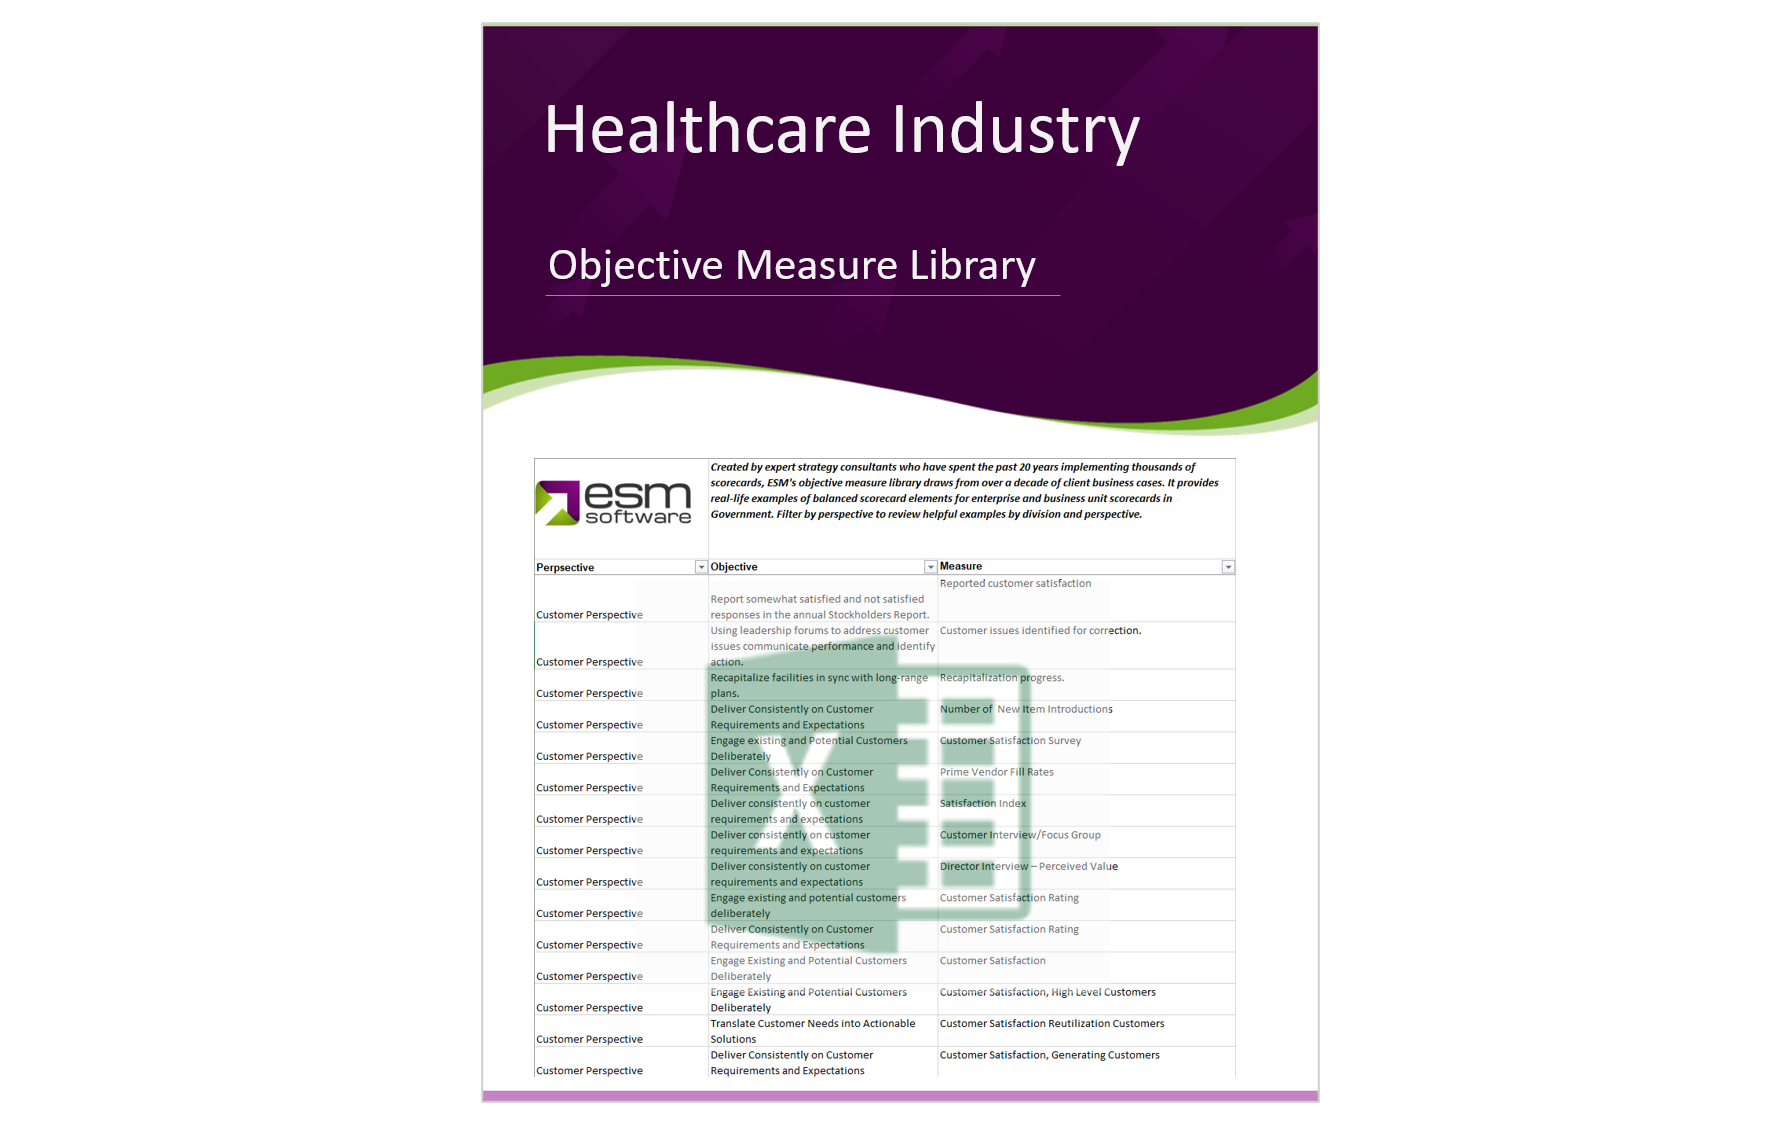 Objective Measure Library - Healthcare - IMAGE - 7.5 x 11.8